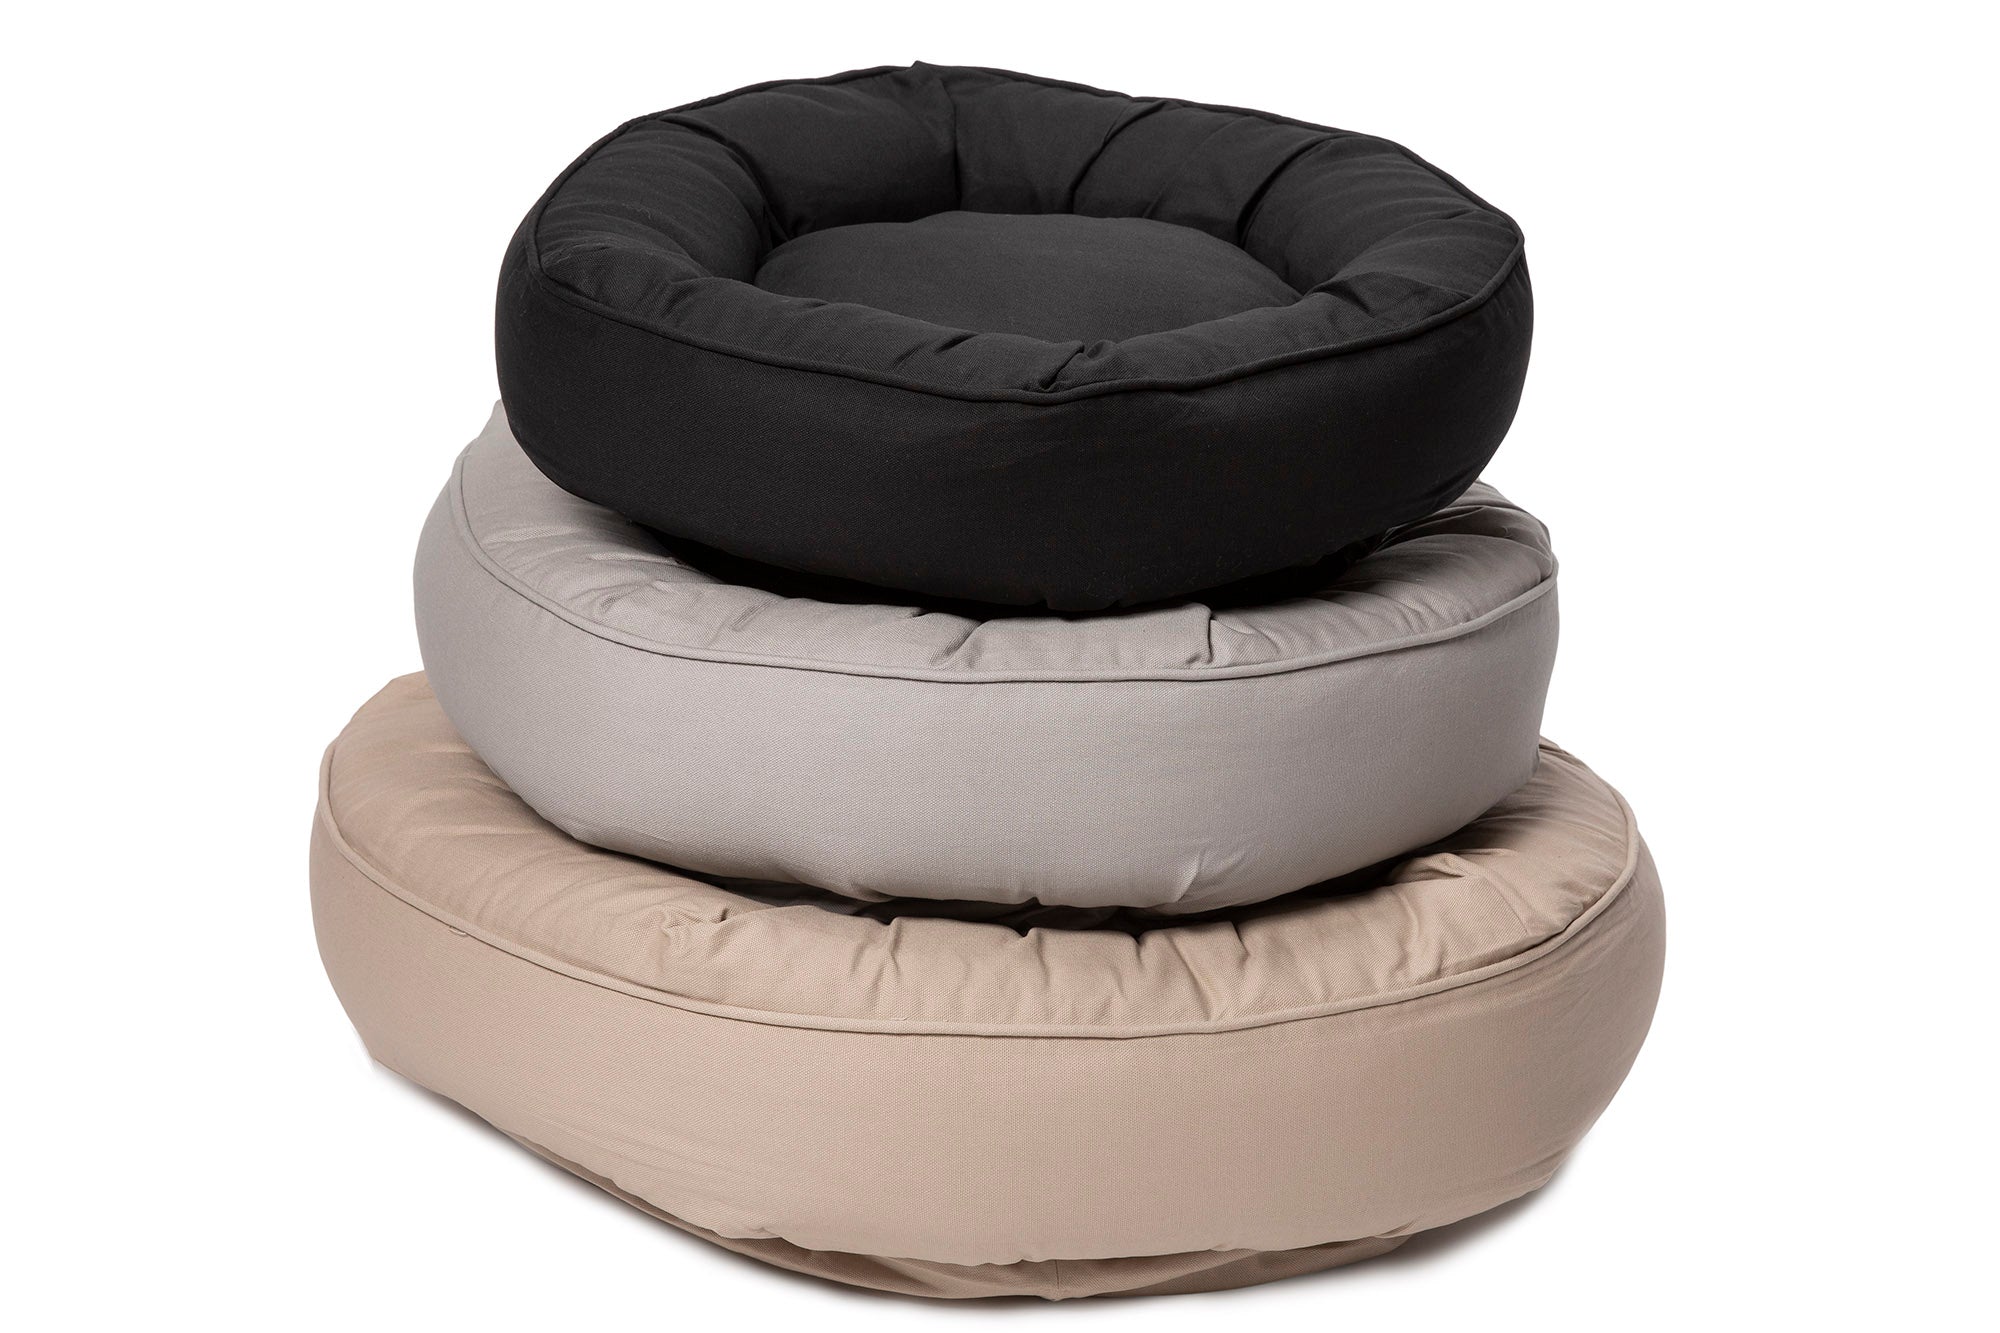 Canine Styles - Cotton Canvas - Monochromatic Nesting with self colored piping - Black Gray Tan